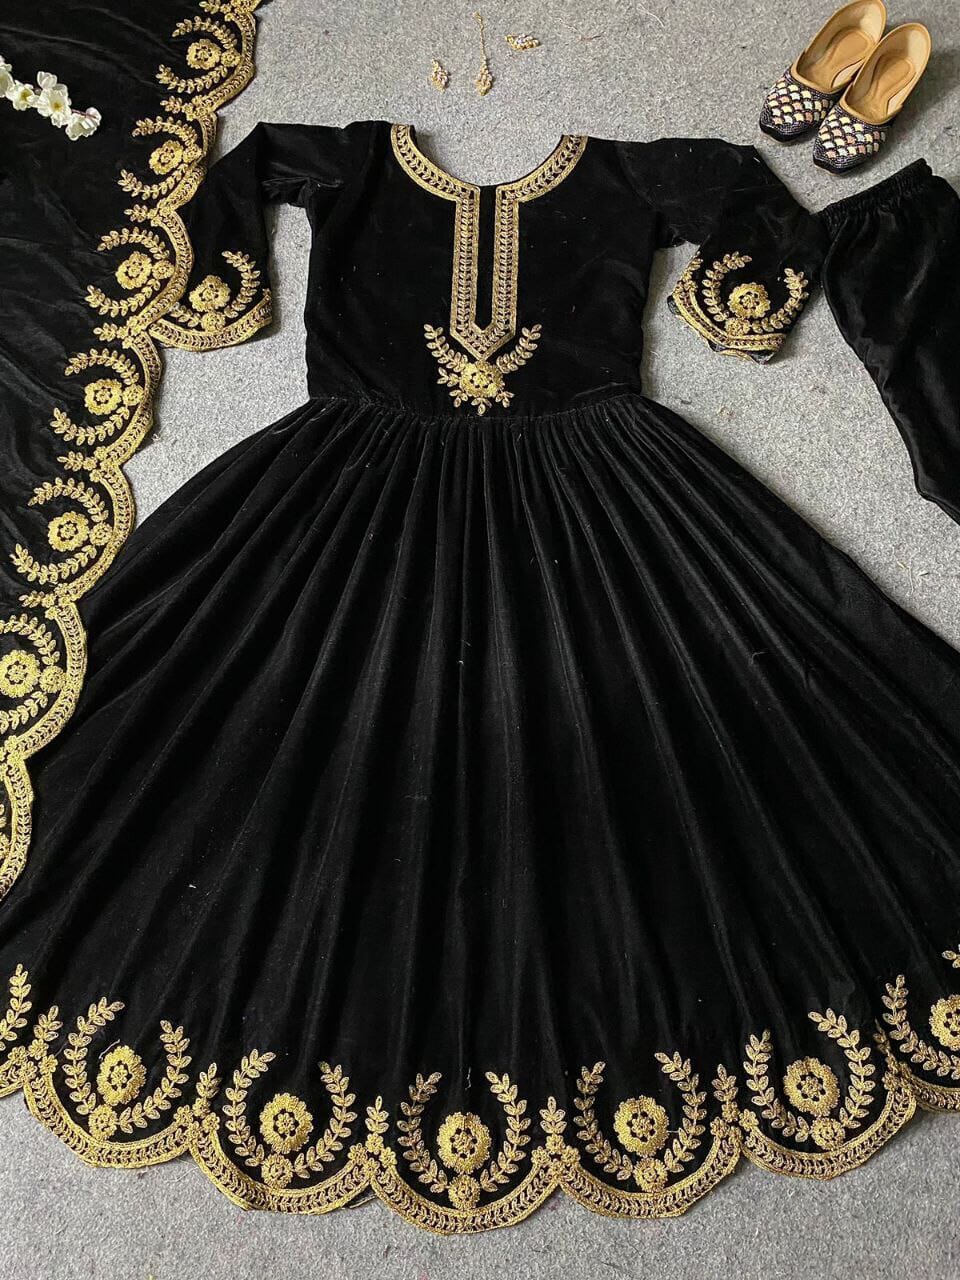 MF 198 Heavy Viscose Velvet With Heavy Embroidery Work Anarkali Gown Suit Designer Suits shopindi.sg 